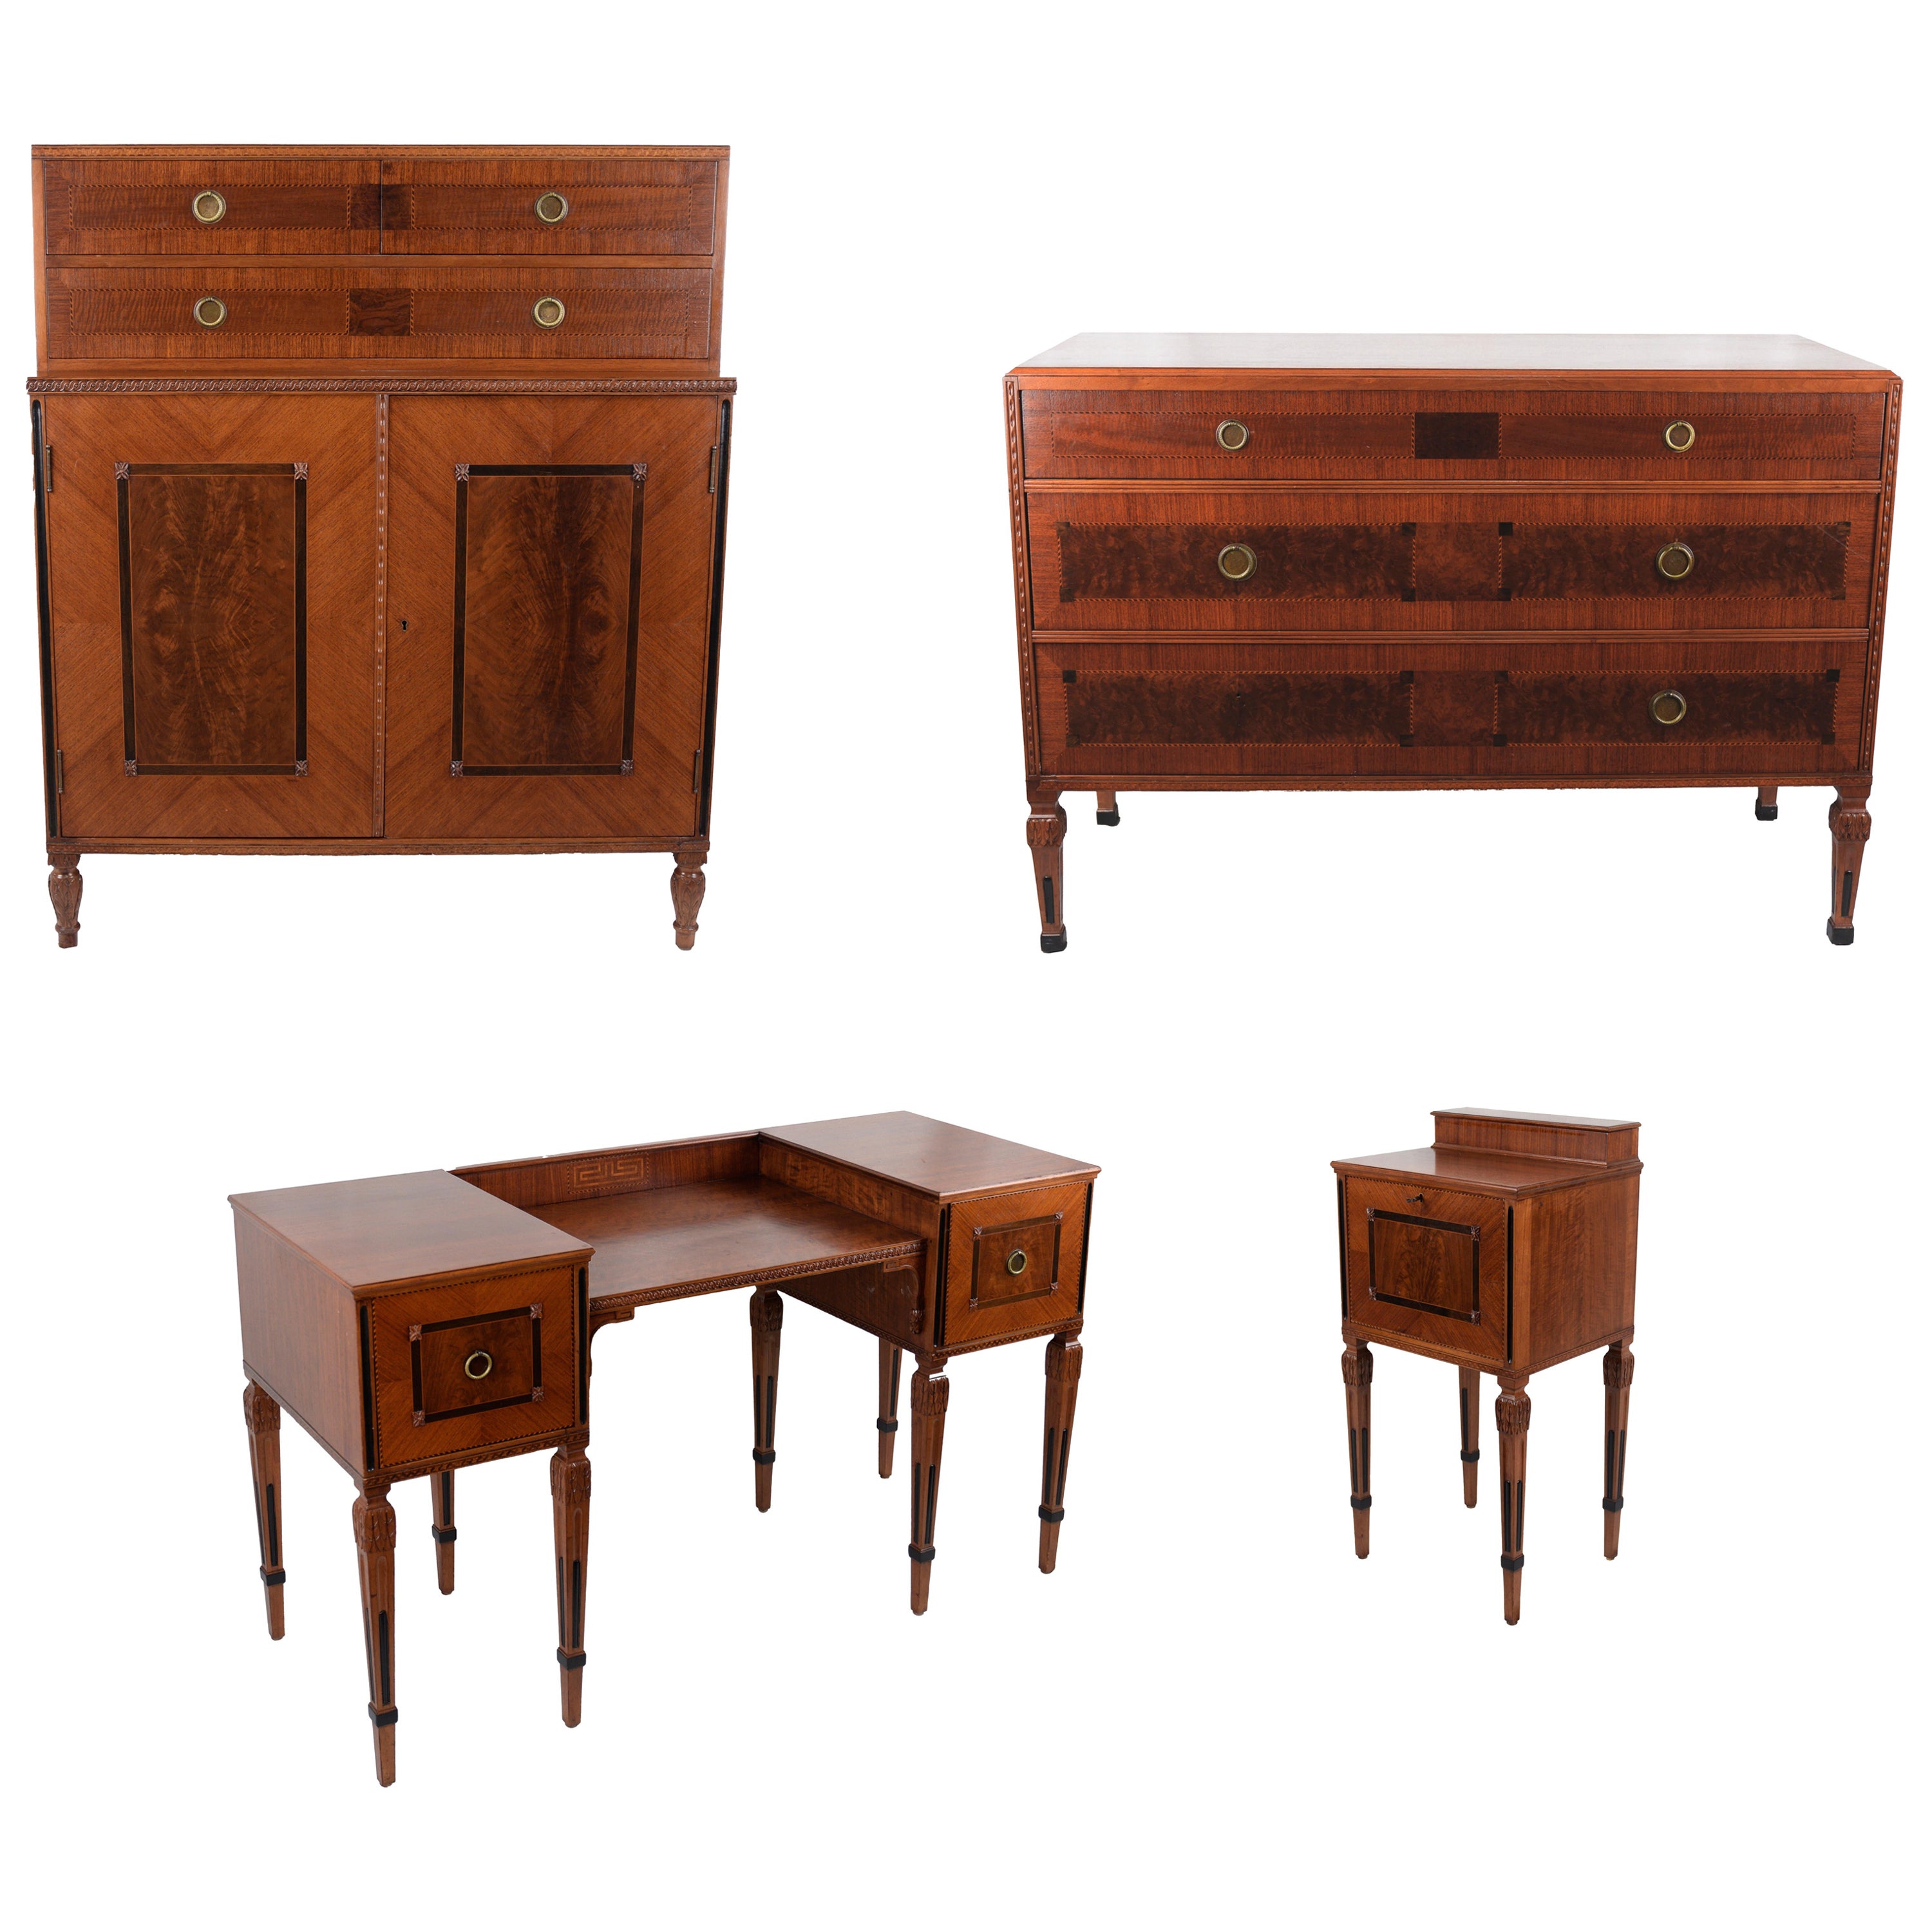 4-Piece Federal Bedroom Set: Vanity, End Table, Dresser, Chest of Drawers For Sale